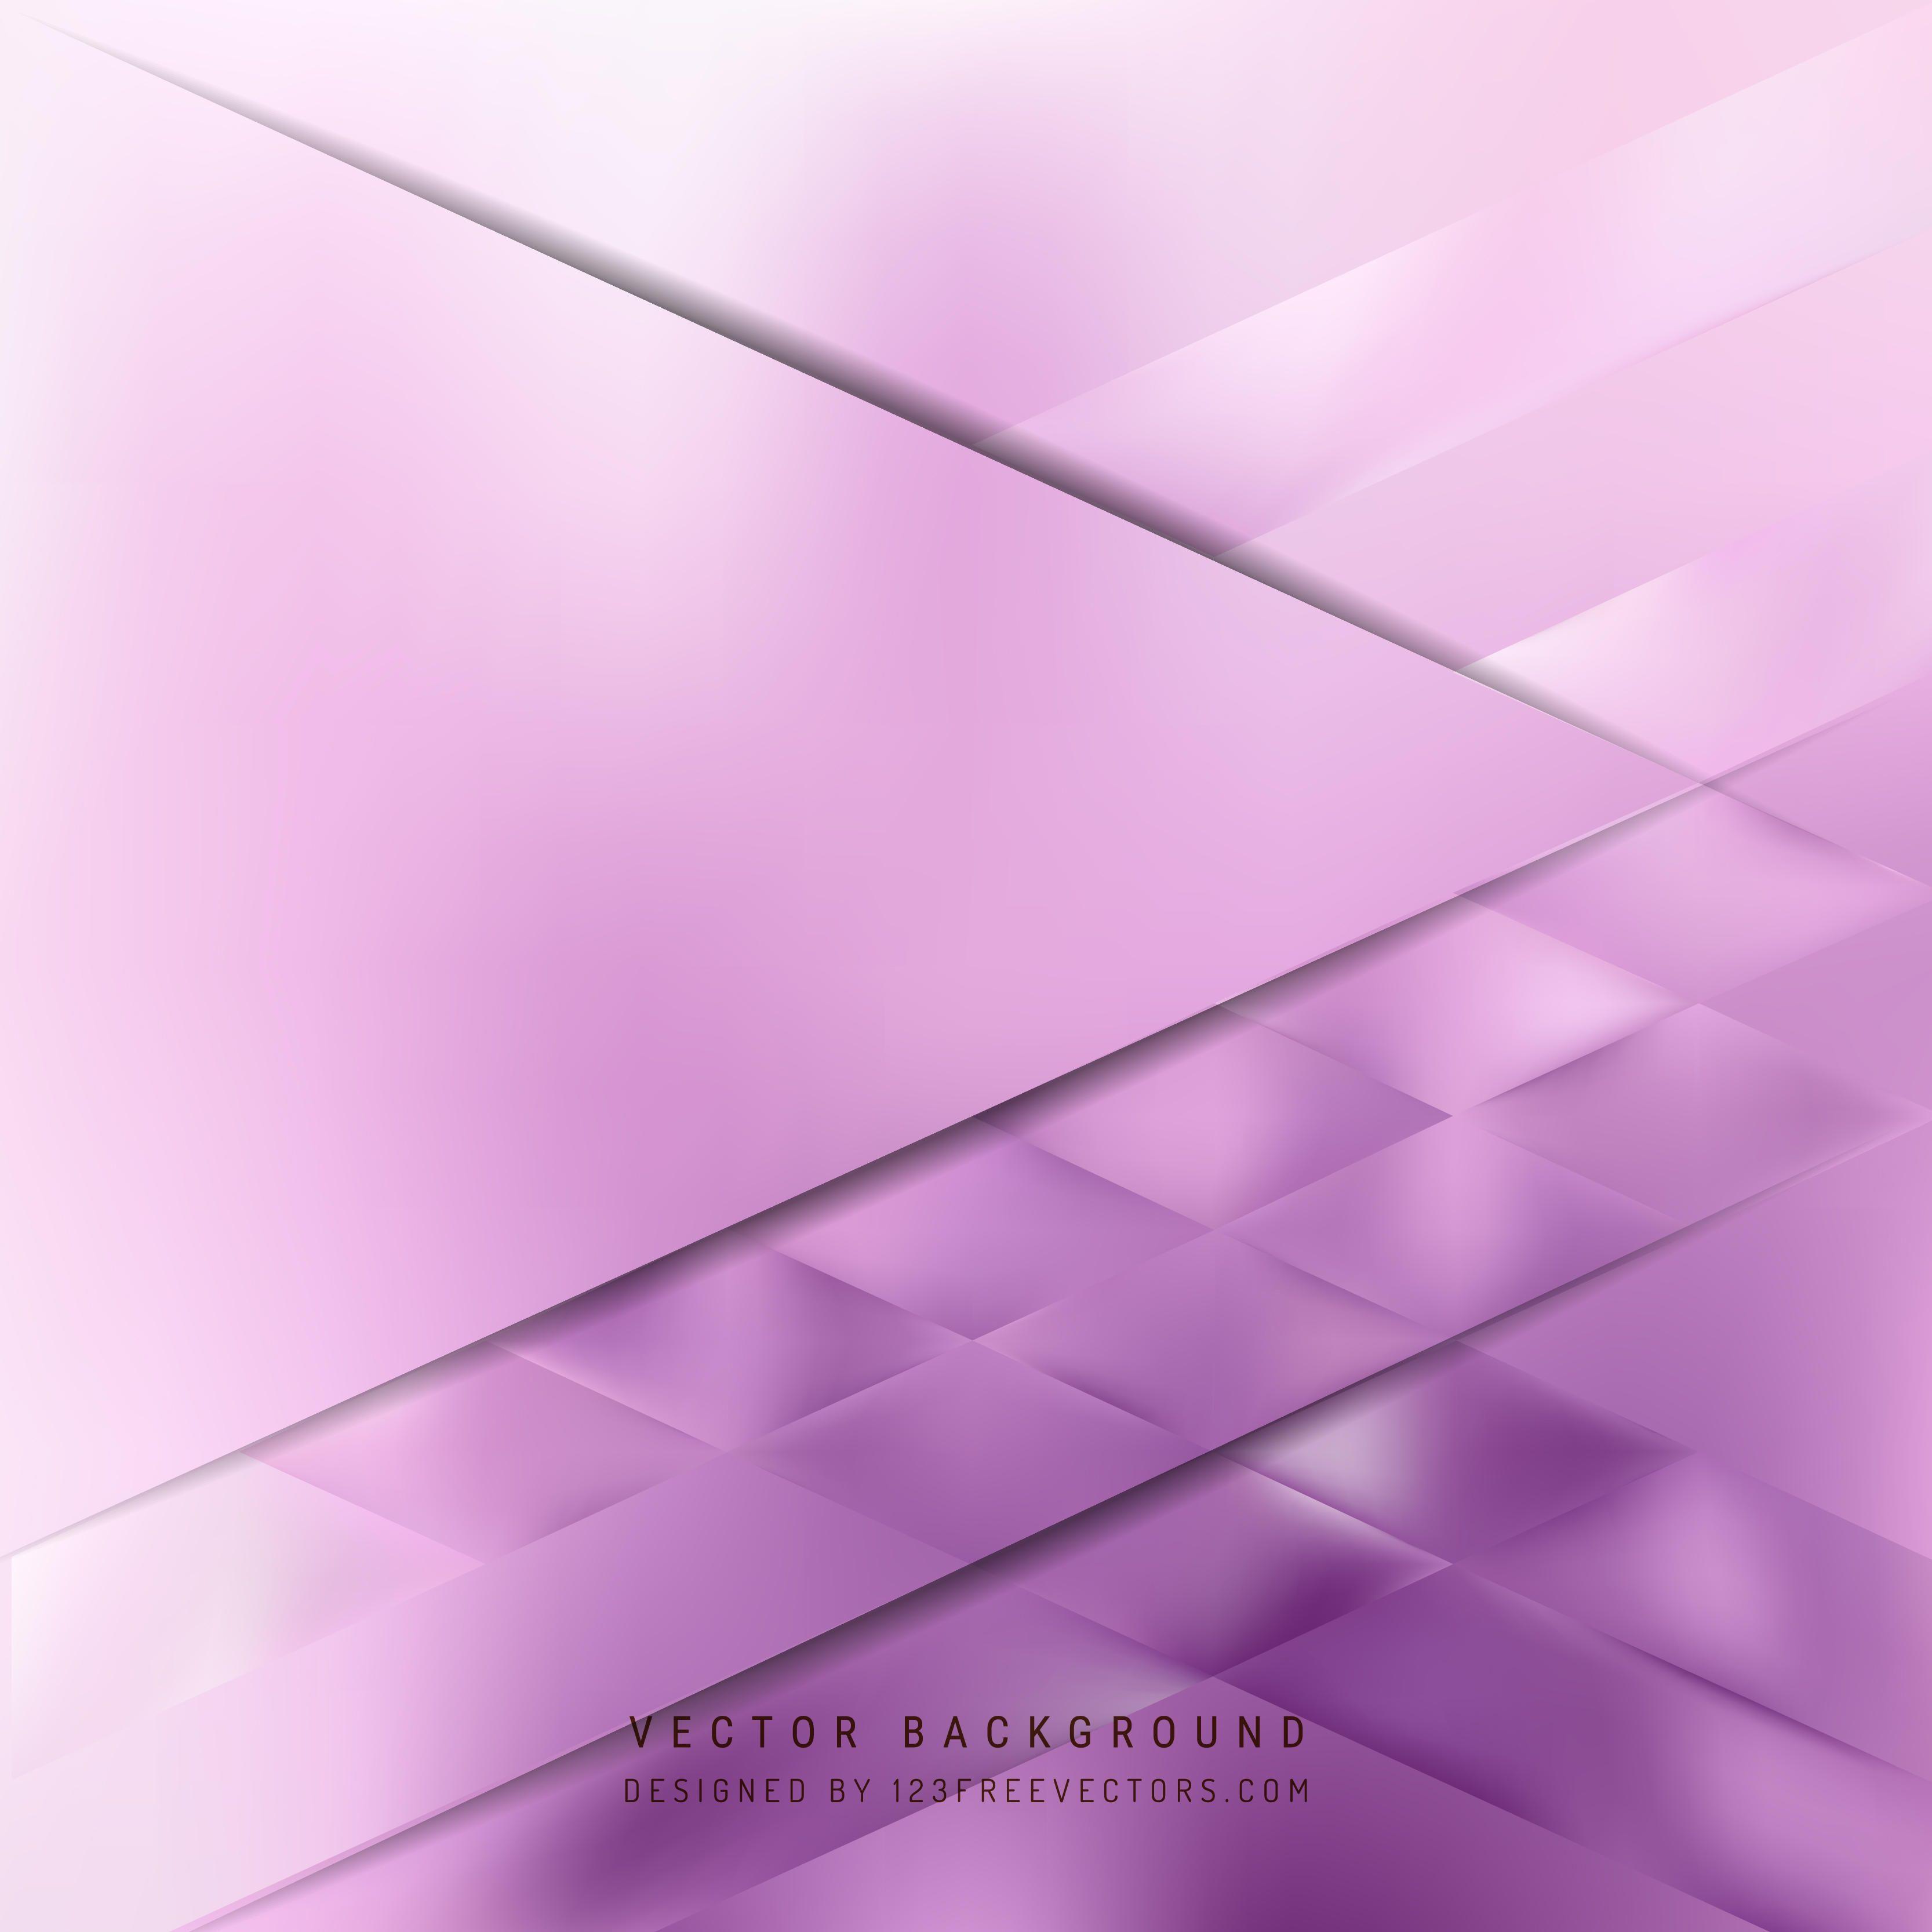 Abstract Light Purple BackgroundFreevectors